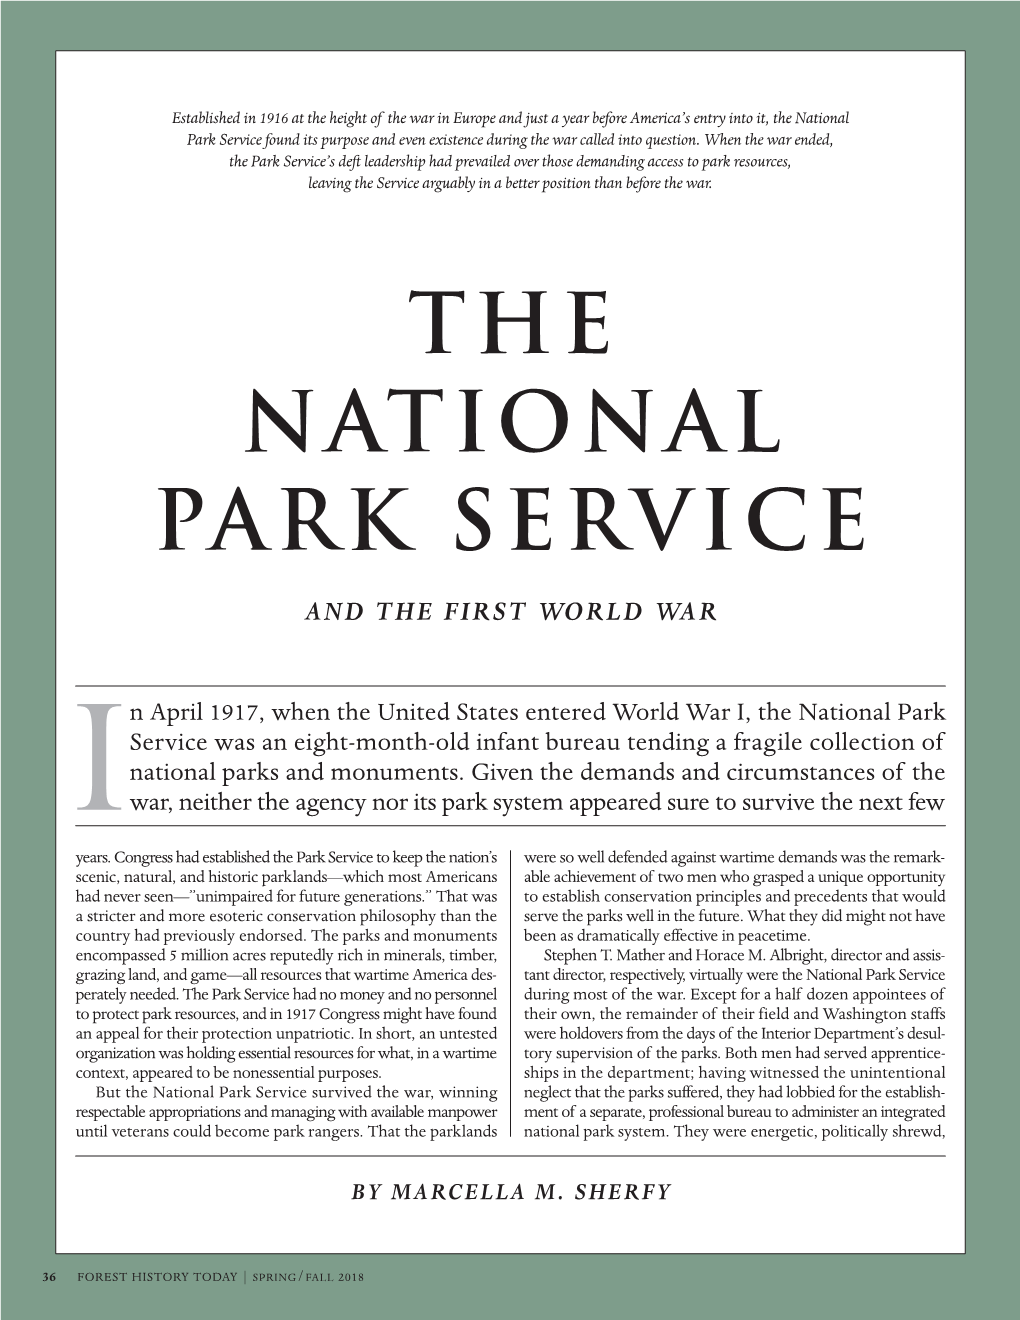 The National Park Service Found Its Purpose and Even Existence During the War Called Into Question